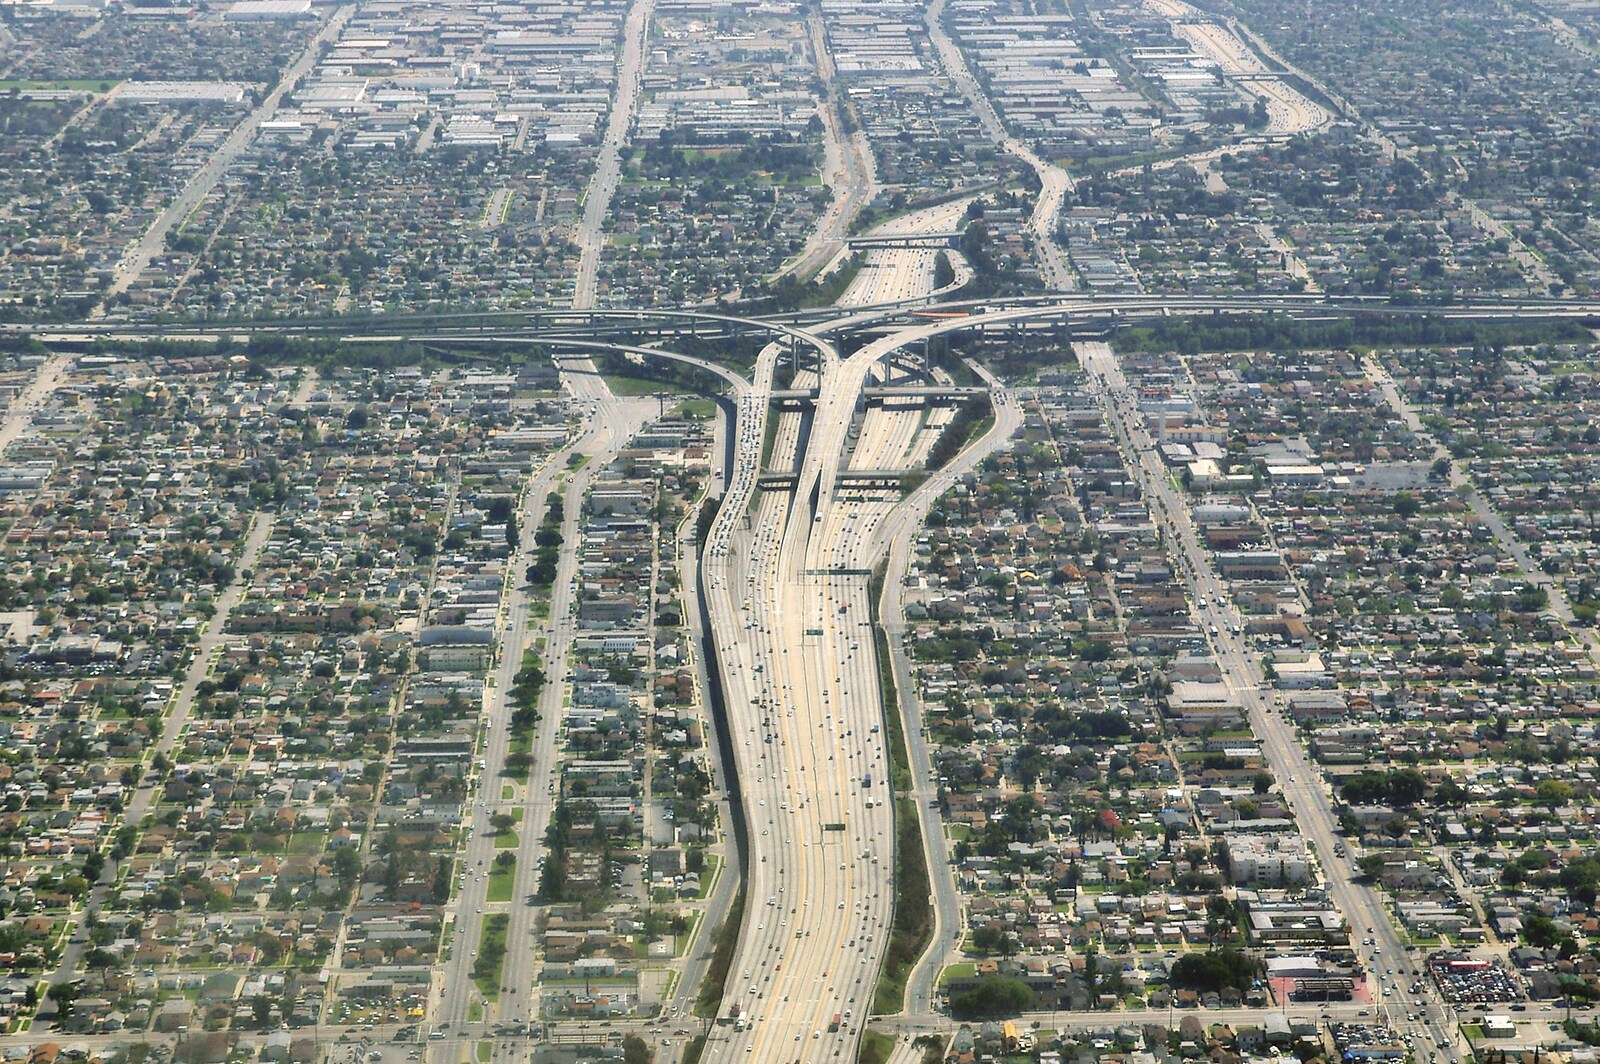 A monster Freeway slices through South LA from San Diego Seven: The Desert and the Dunes, Arizona and California, US - 22nd April